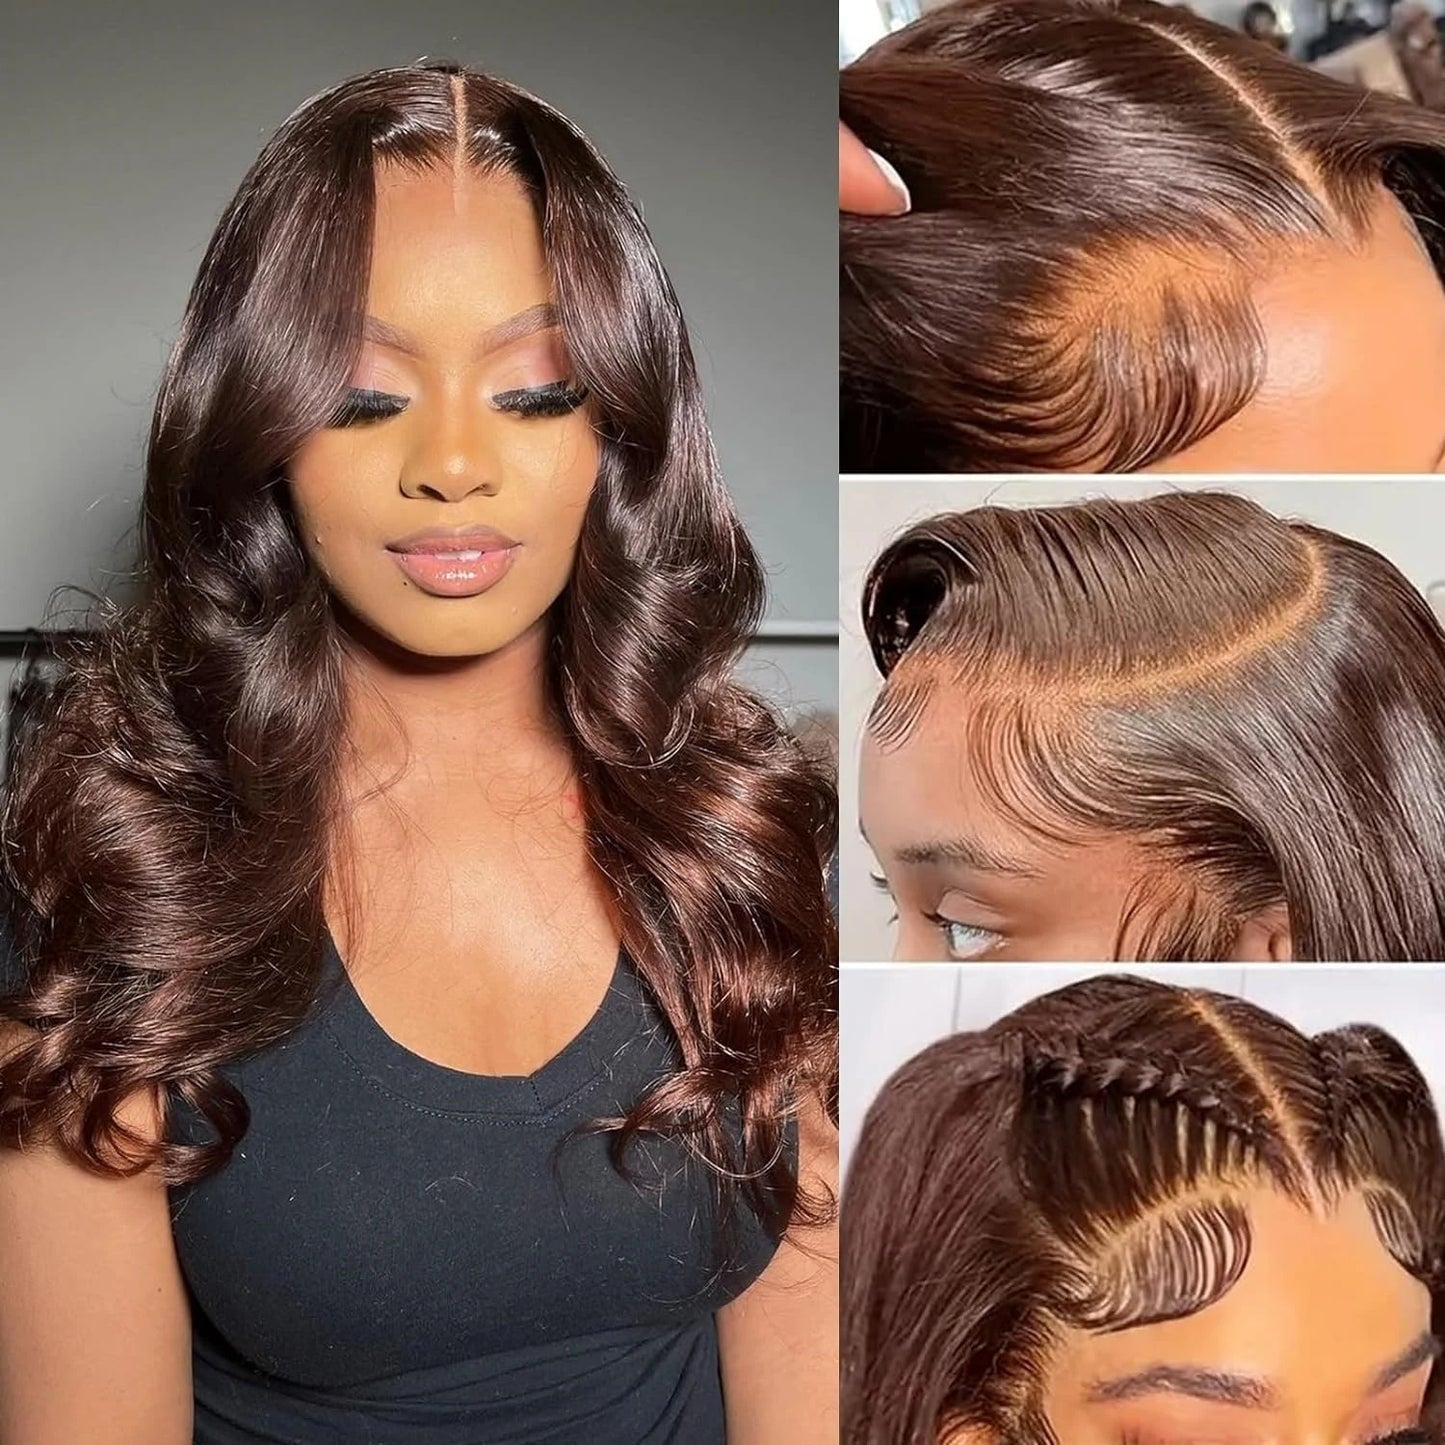 Lace Frontale 13x4 4x4 HD Lace Chocolate Body Wave